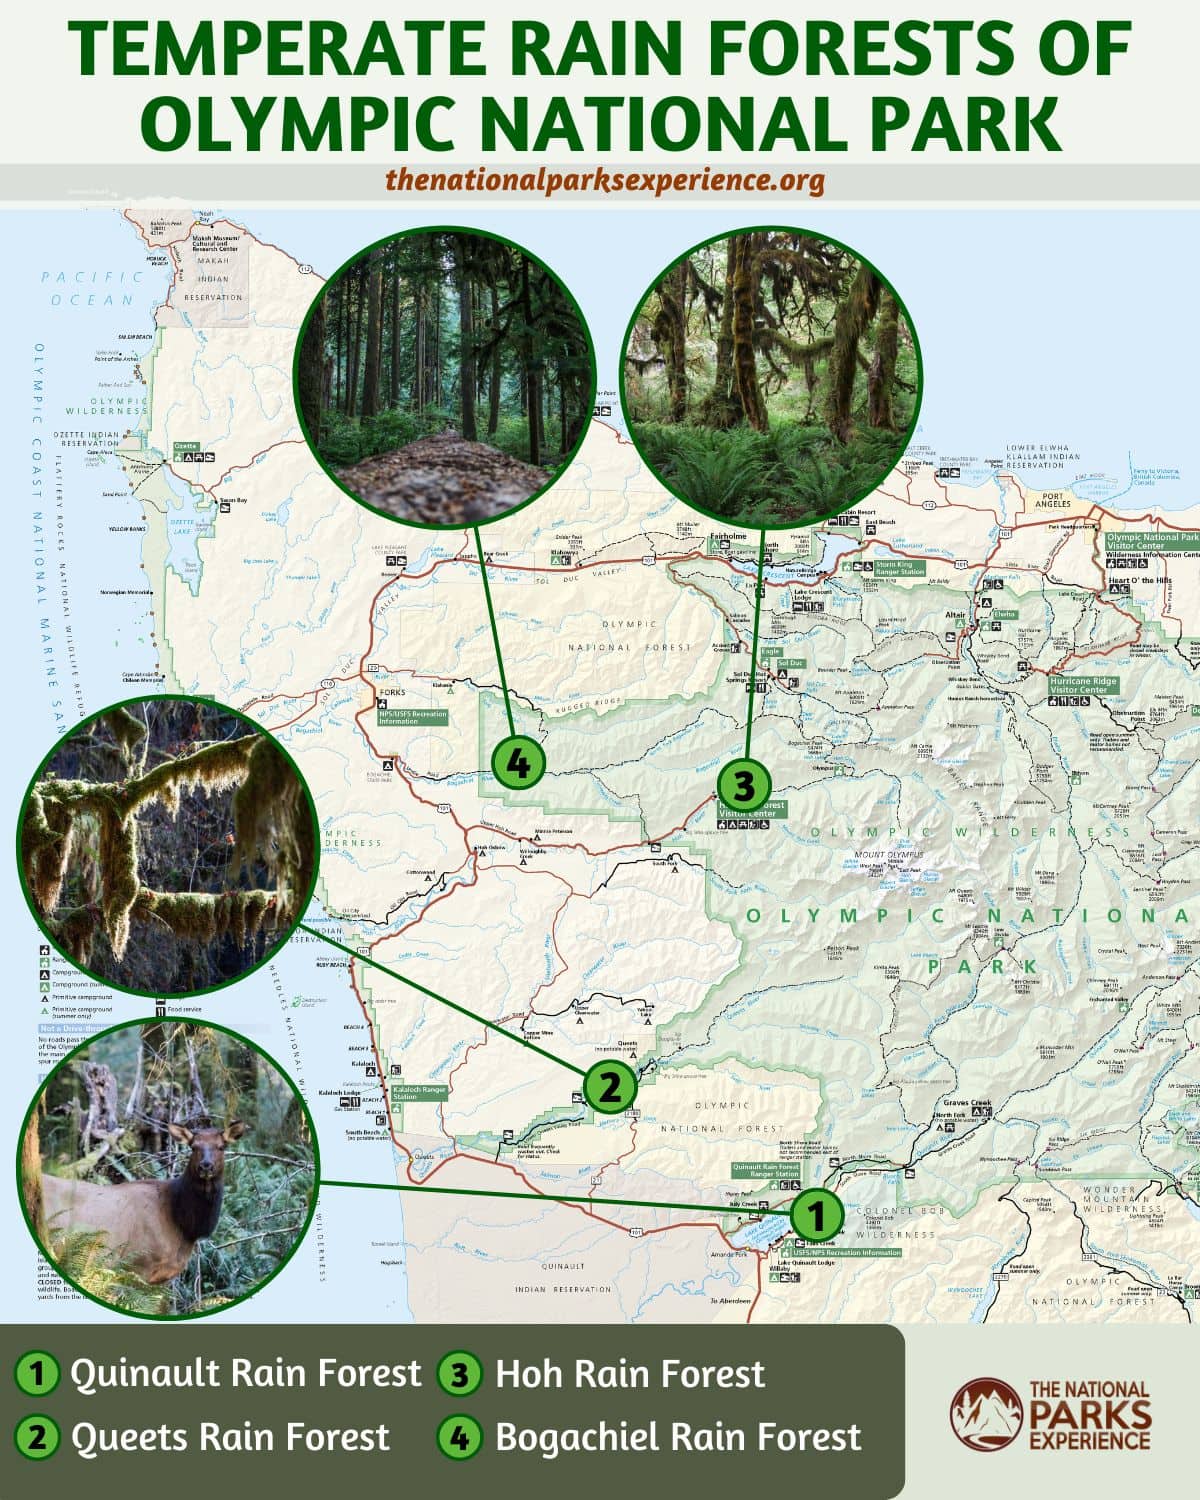 Map of the Temperate Rain Forests in Olympic National Park, Washington